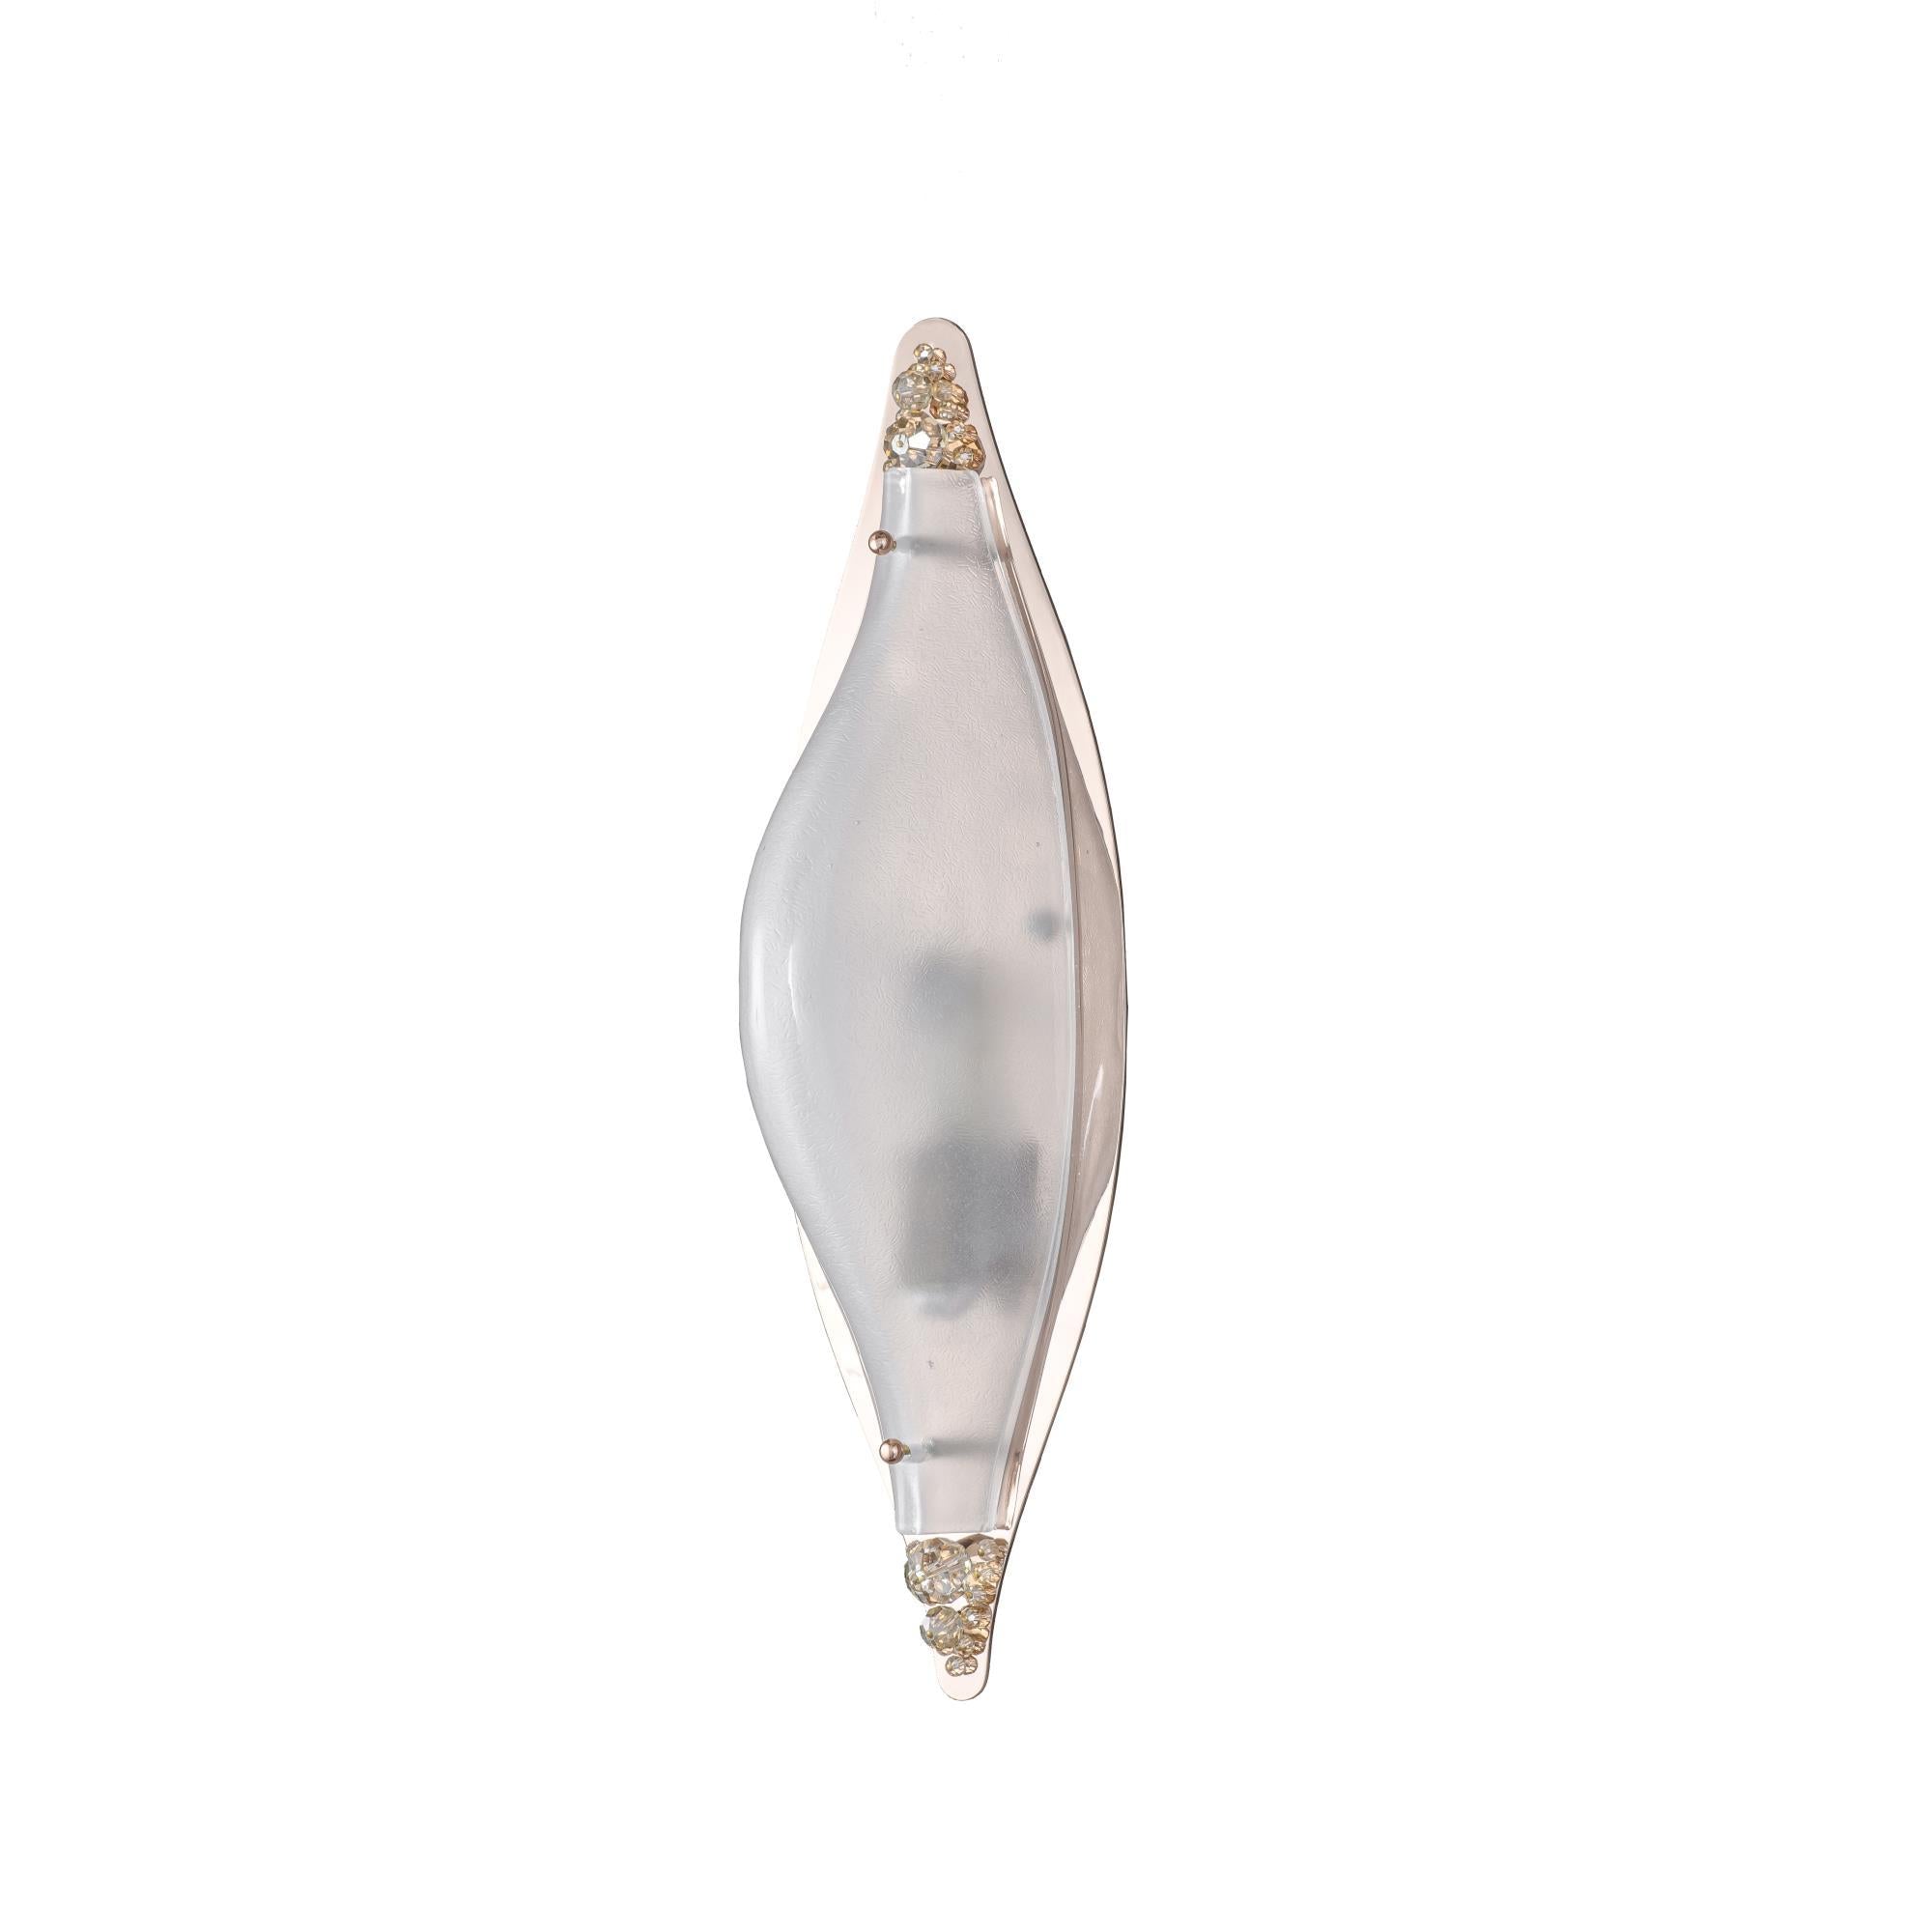 Alba  Tiered Oval Glass Sconce - Italian Concept - 